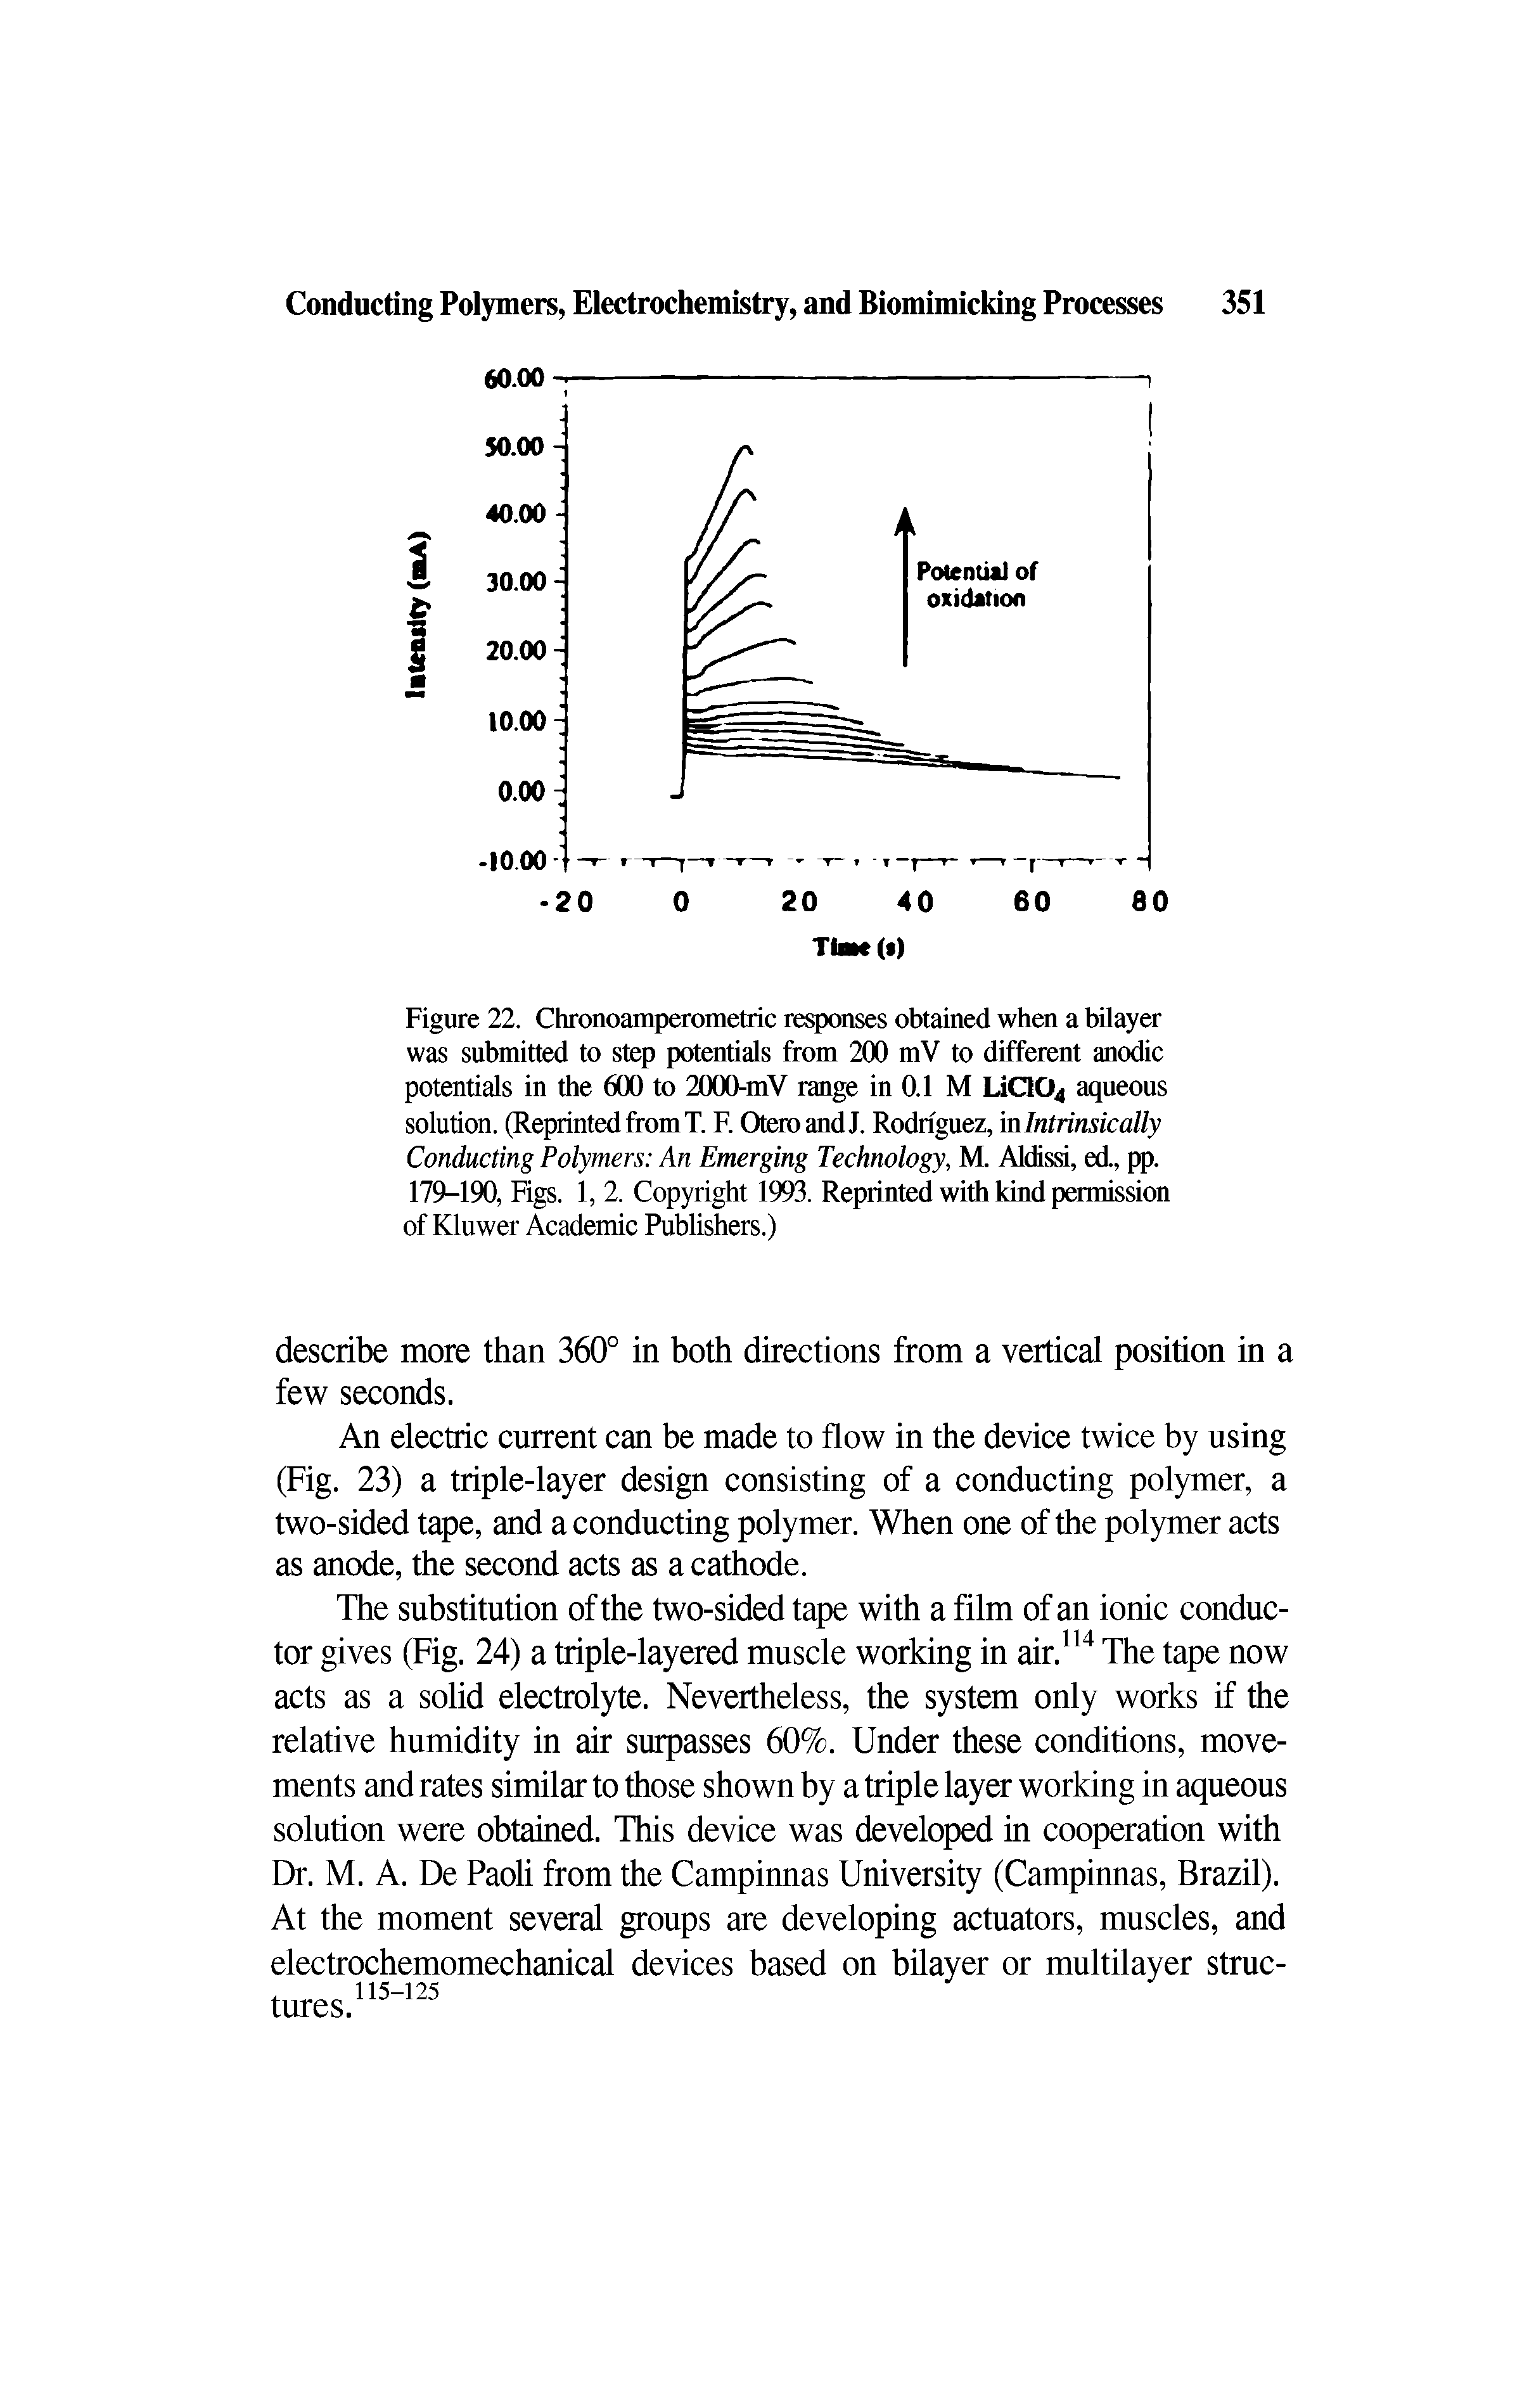 Figure 22. Chronoamperometric responses obtained when a bilayer was submitted to step potentials from 200 mV to different anodic potentials in the 600 to 2000-mV range in 0.1 M LiC104 aqueous solution. (Reprinted from T. F. Otero and J. Rodriguez, in Intrinsically Conducting Polymers An Emerging Technology, M. Aldissi, ed., pp. 179-190, Figs. 1, 2. Copyright 1993. Reprinted with kind permission of Kluwer Academic Publishers.)...